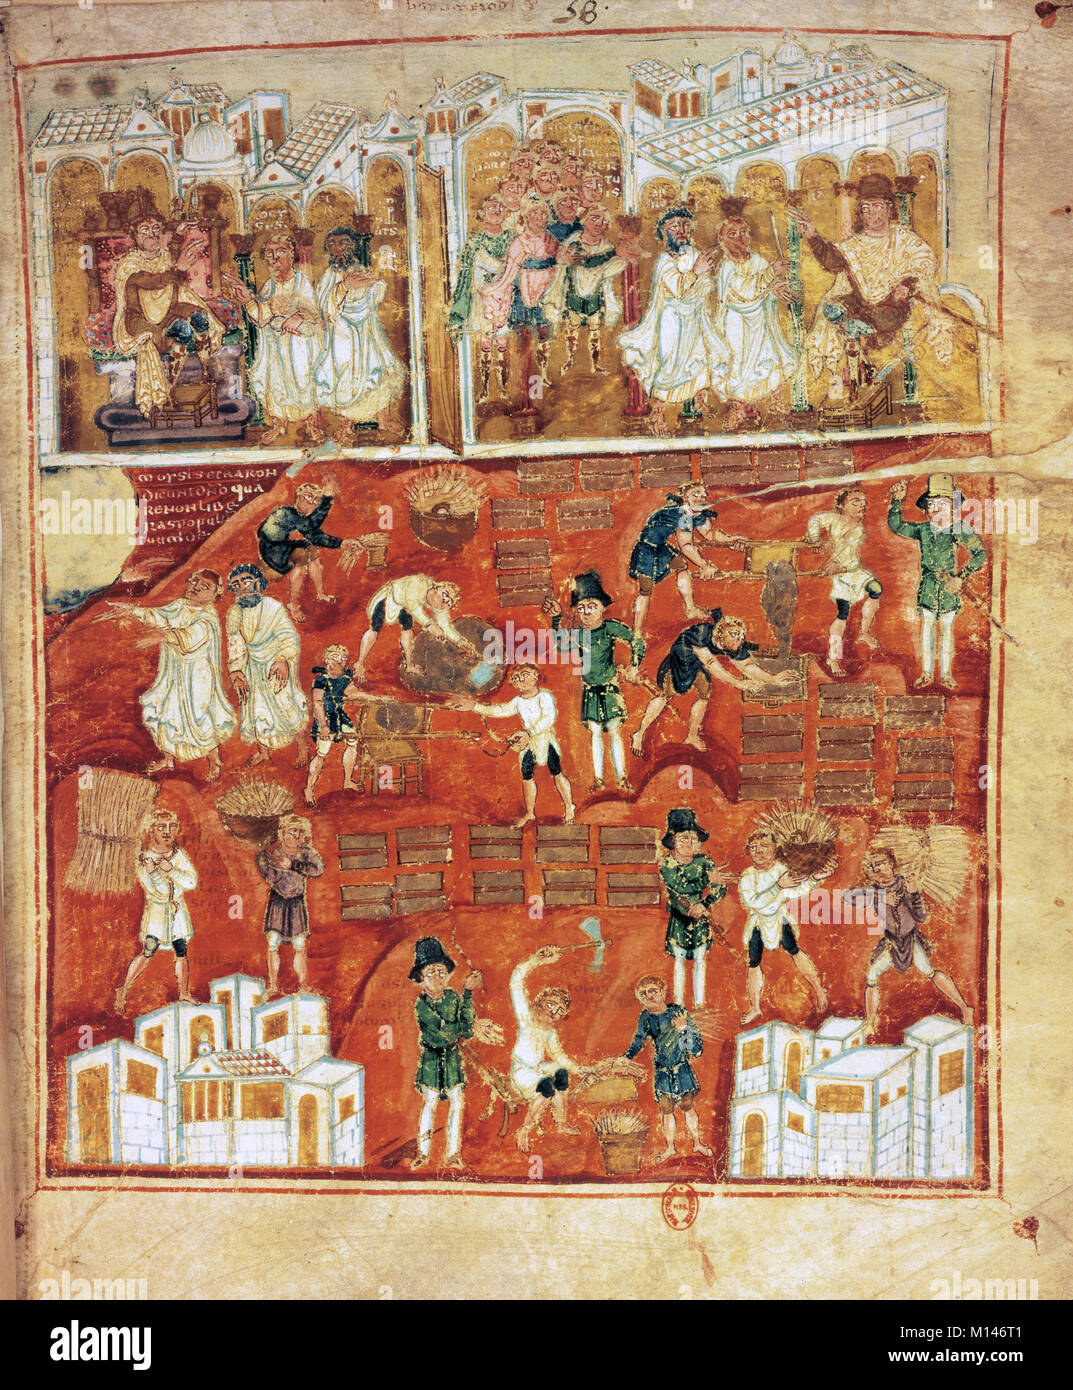 The Ashburnham Pentateuch or Tours Pentateuch. Late 6th -early 7th century Latin Illuminated manuscript of the Pentateuch, the first five book of the Old Testament.   Construction of a city. National Library of France. Paris. Stock Photo